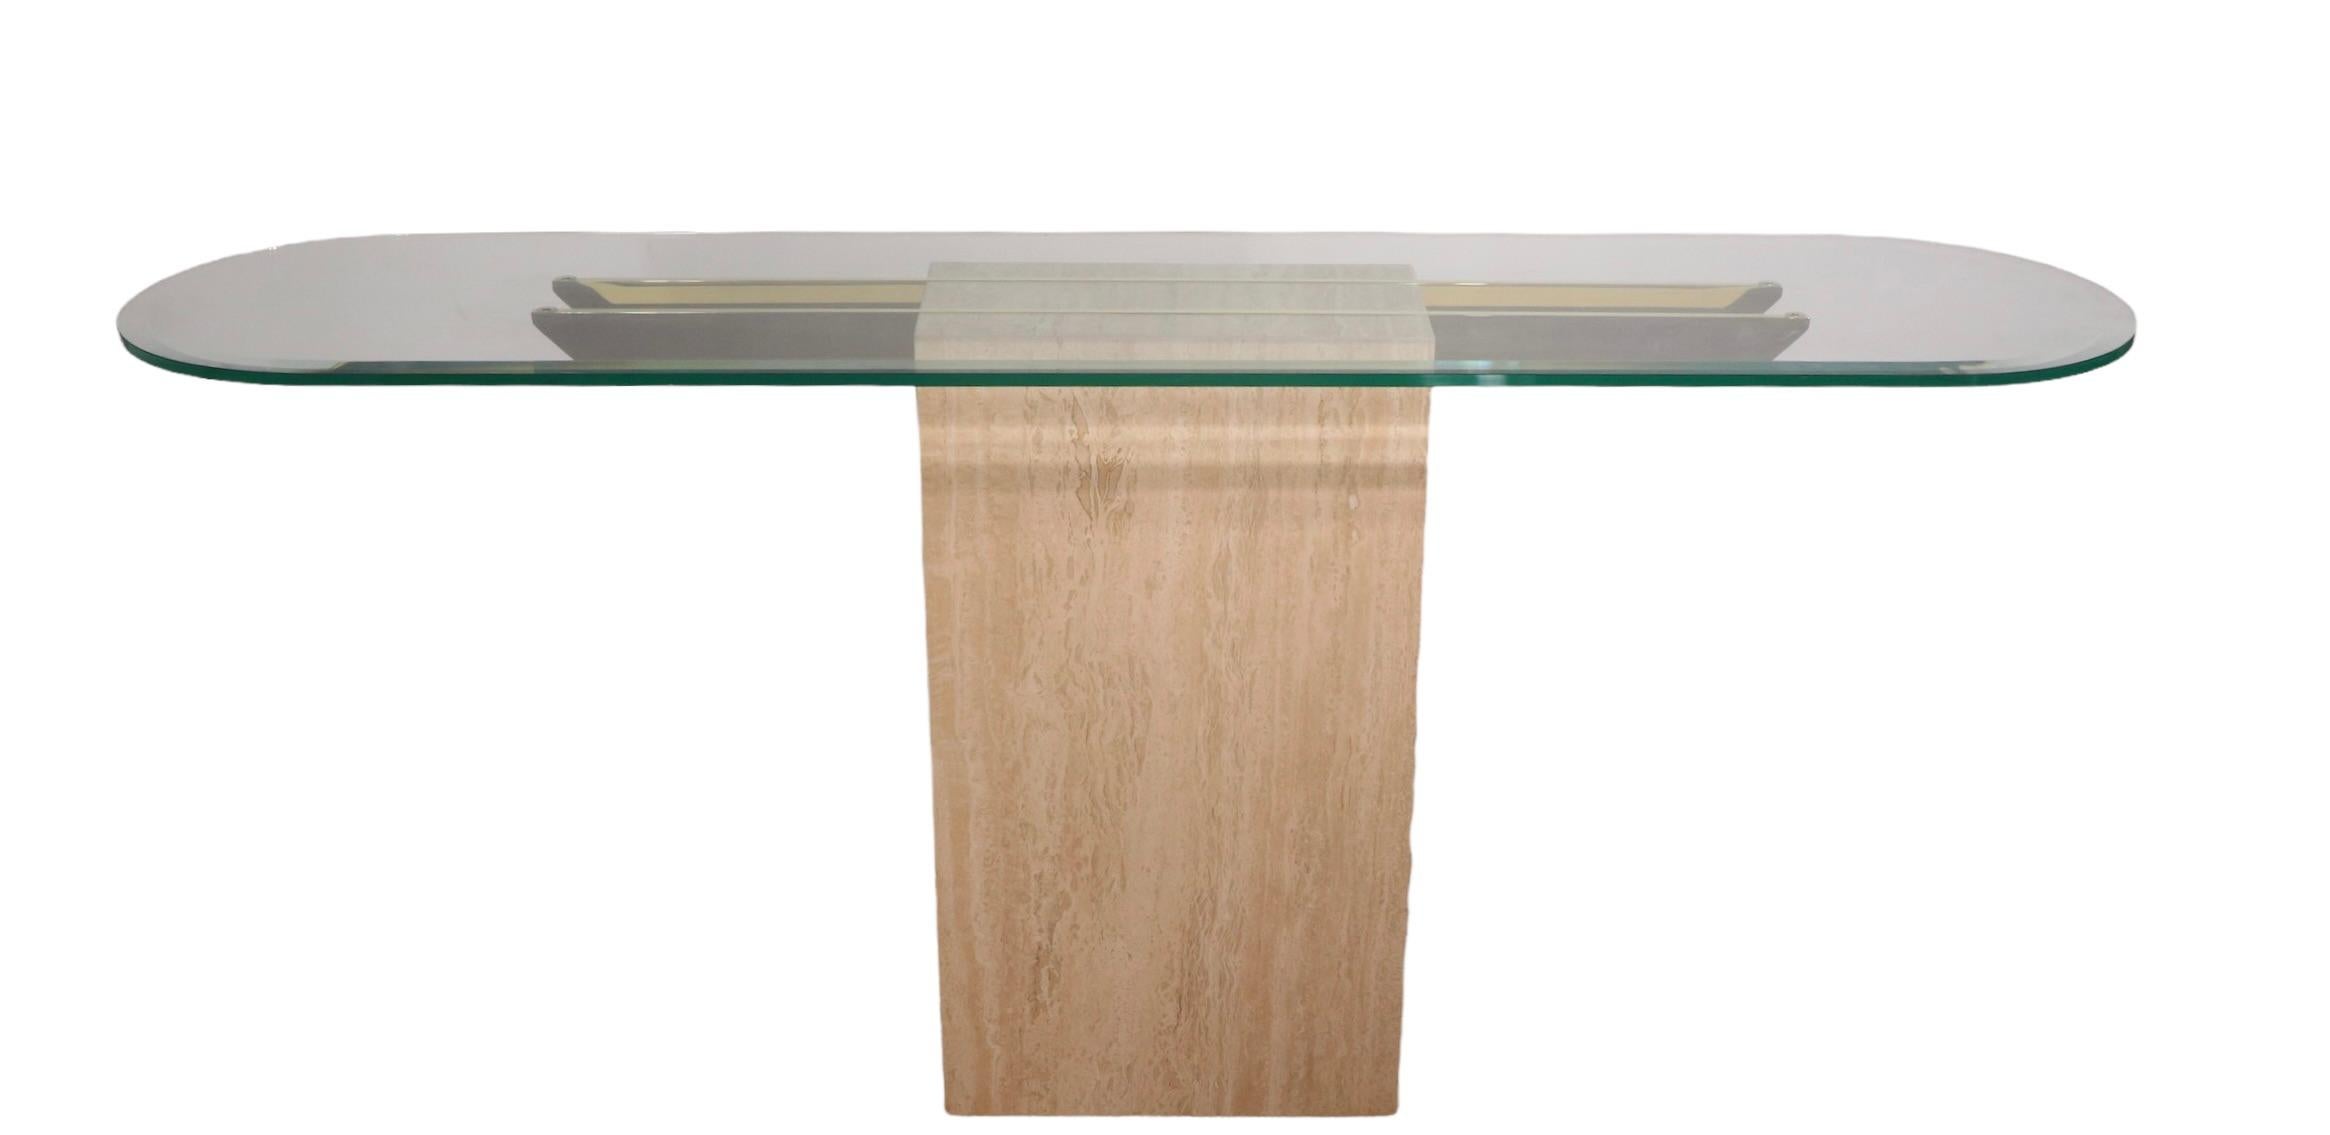 Chic Artedi console table, in very clean, original ready to use condition. The base is a rectangular marble, with two horizontal brass supports and an unusual plate glass oval top. The top features a nice wide bevel, adding to the beauty and